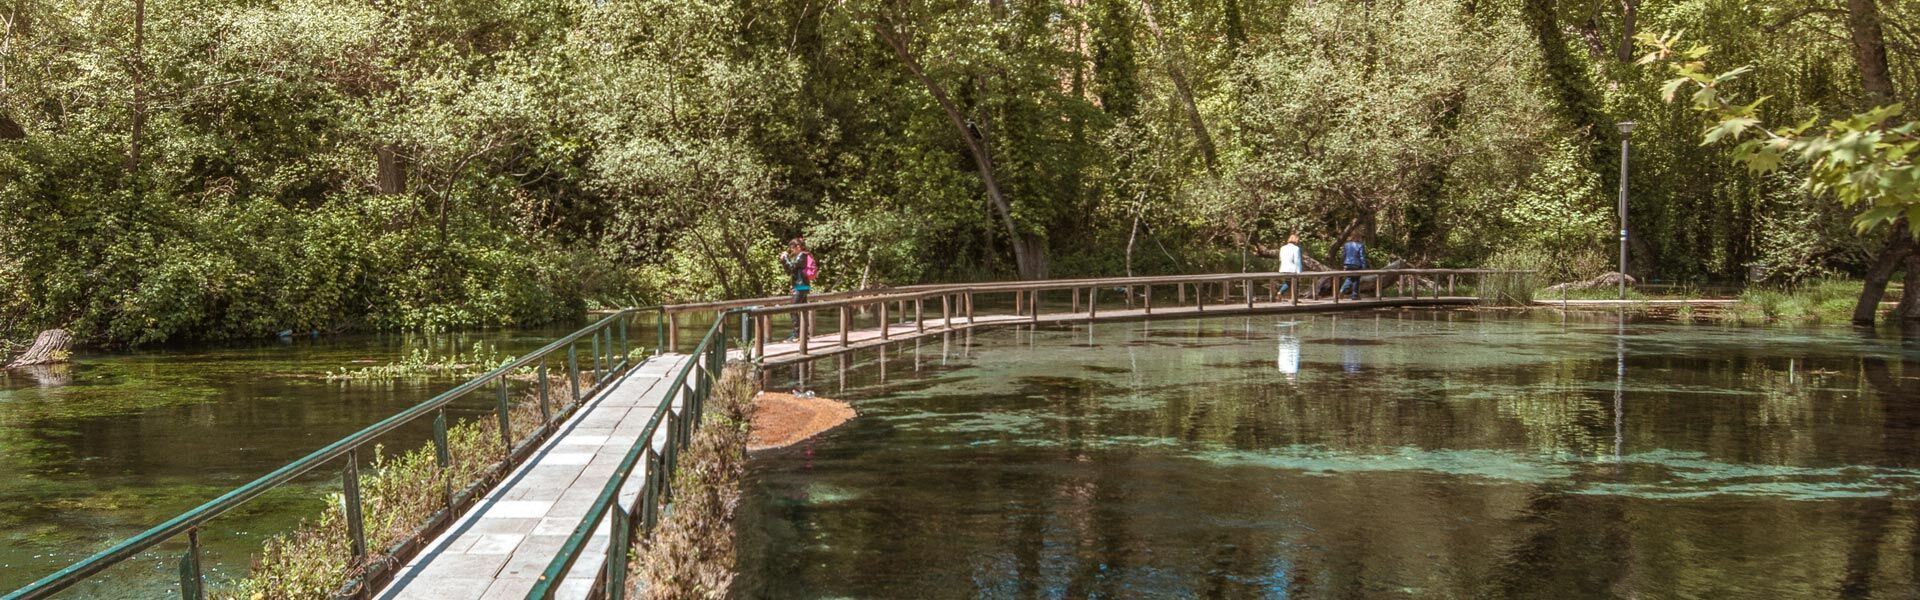 In Agia Varvara park, bubbling springs flow into canals and ponds, watering ancient trees and reminding you of nature’s pure beauty